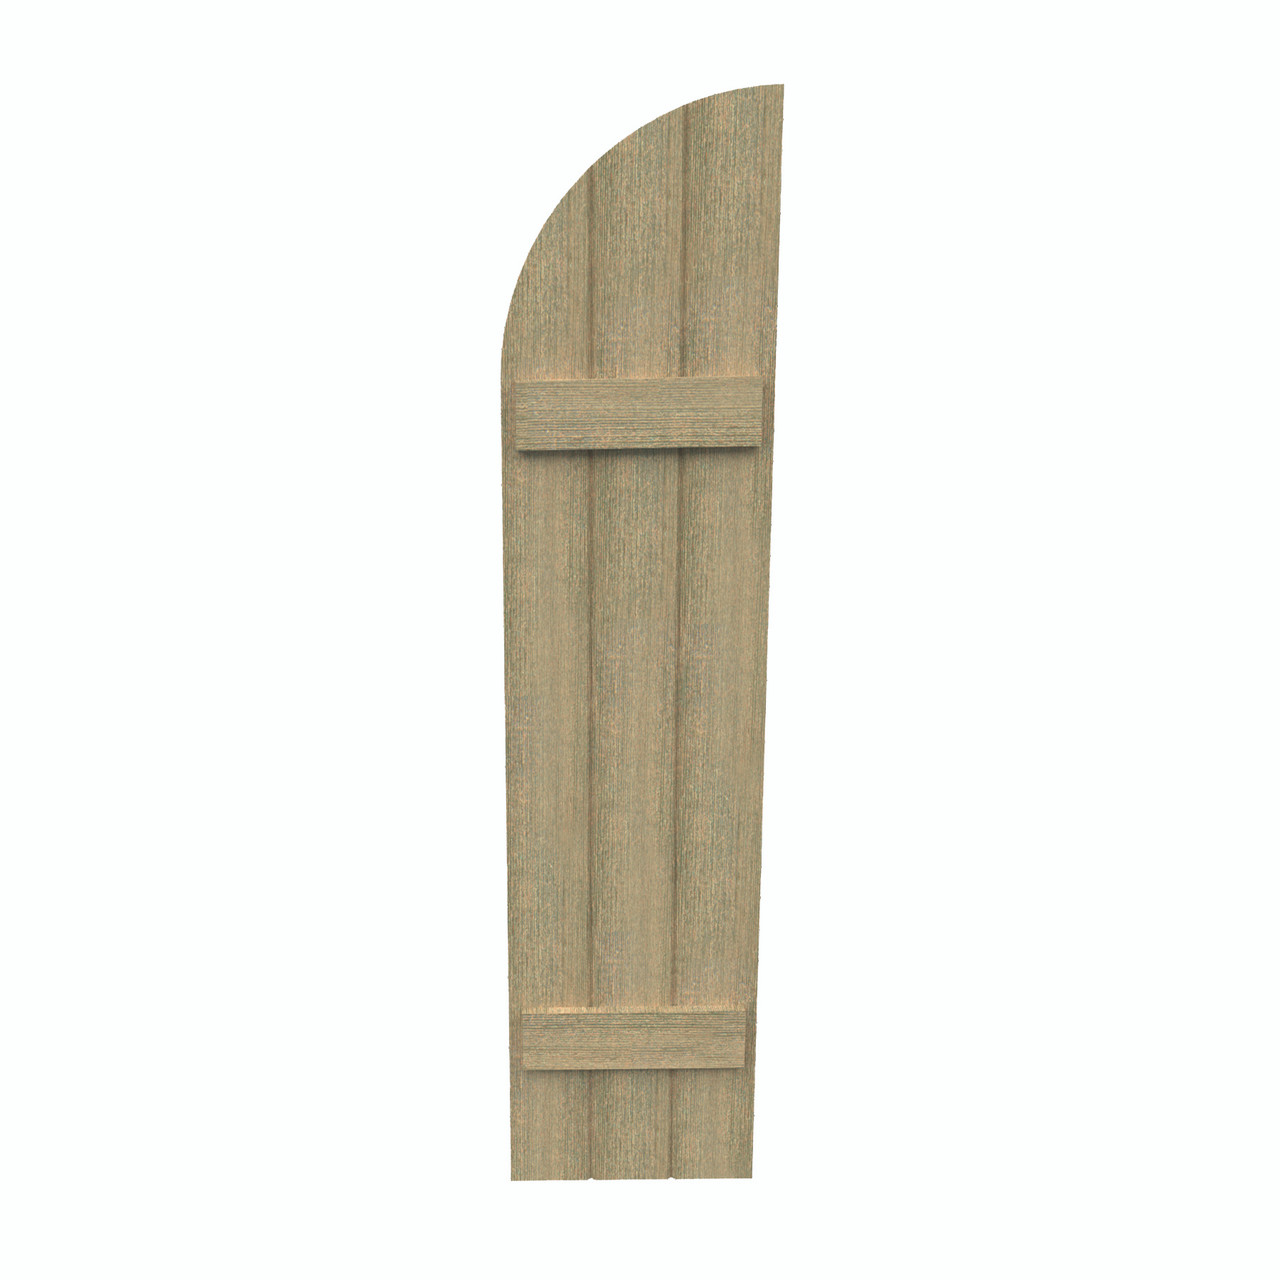 18 inch by 62 inch Quarter Round Shutter with 3-Boards